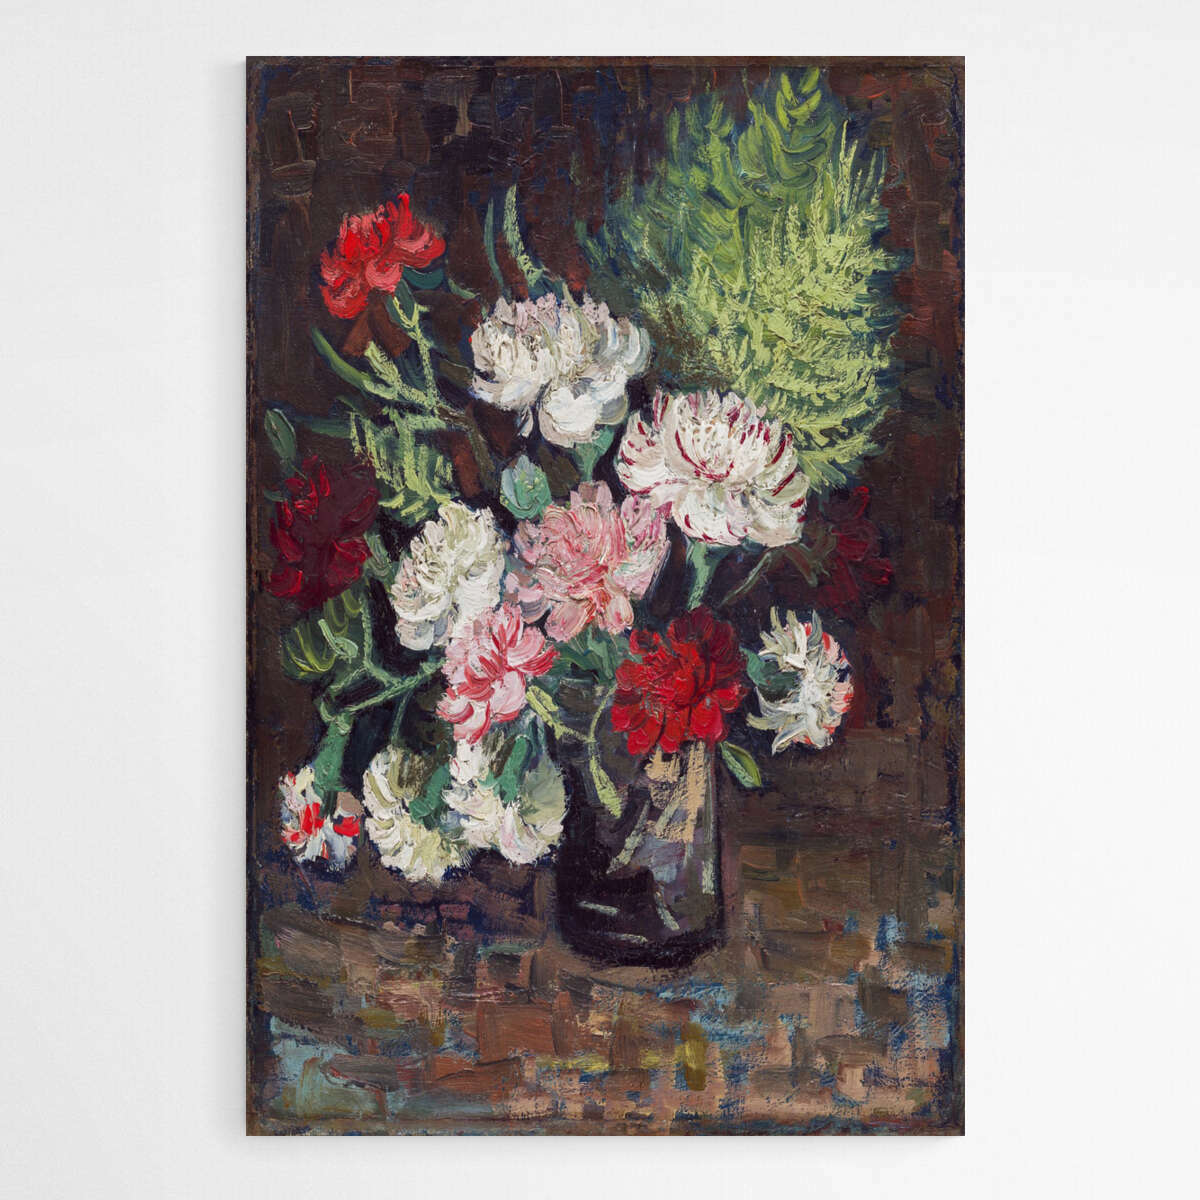 Vase with Carnations by Vincent Van Gogh | Vincent Van Gogh Wall Art Prints - The Canvas Hive